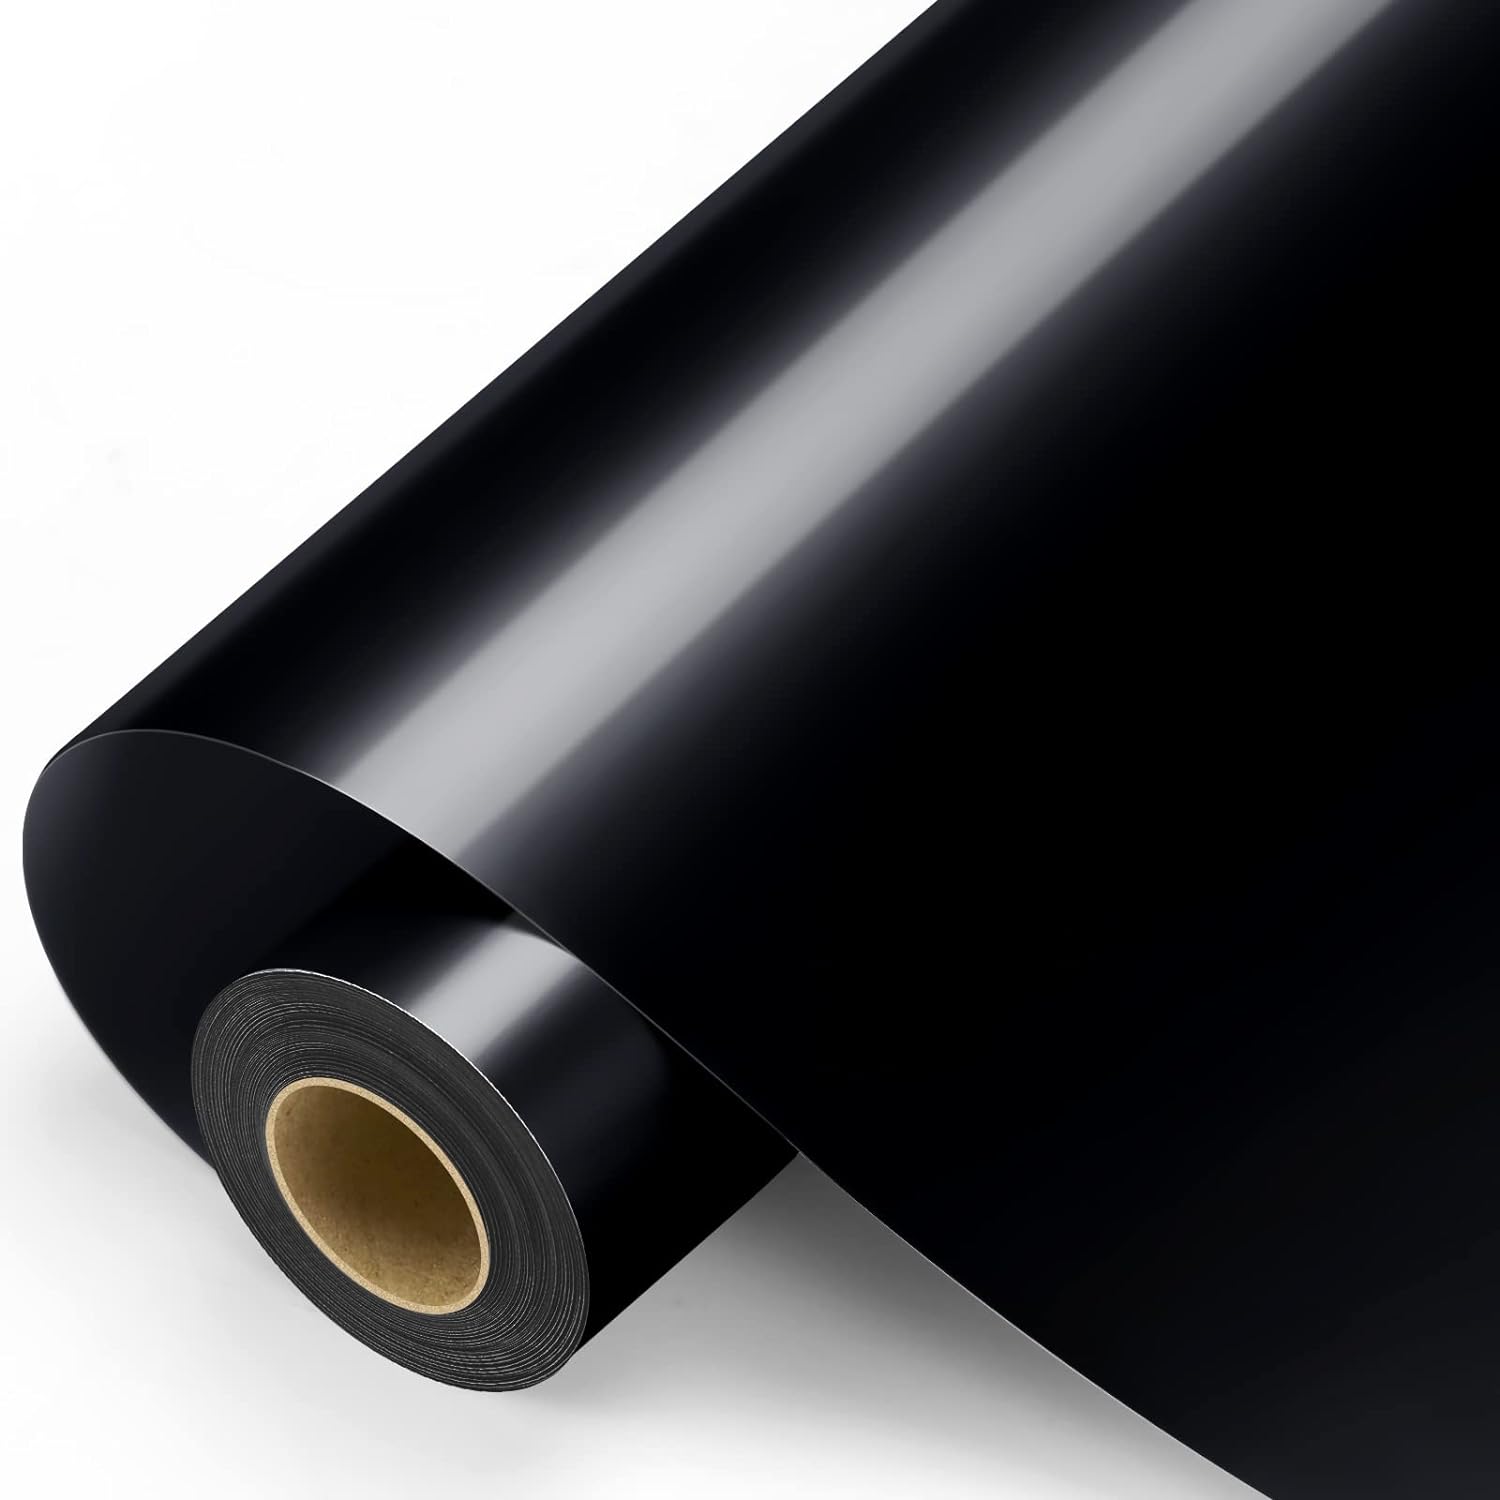 Black Permanent Vinyl - 12x11FT Black Adhesive Vinyl Roll for All Cutting Machine, Permanent Outdoor Vinyl for Decor Sticker, Car Decal, Scrapbooking, Signs, Glossy & Waterproof